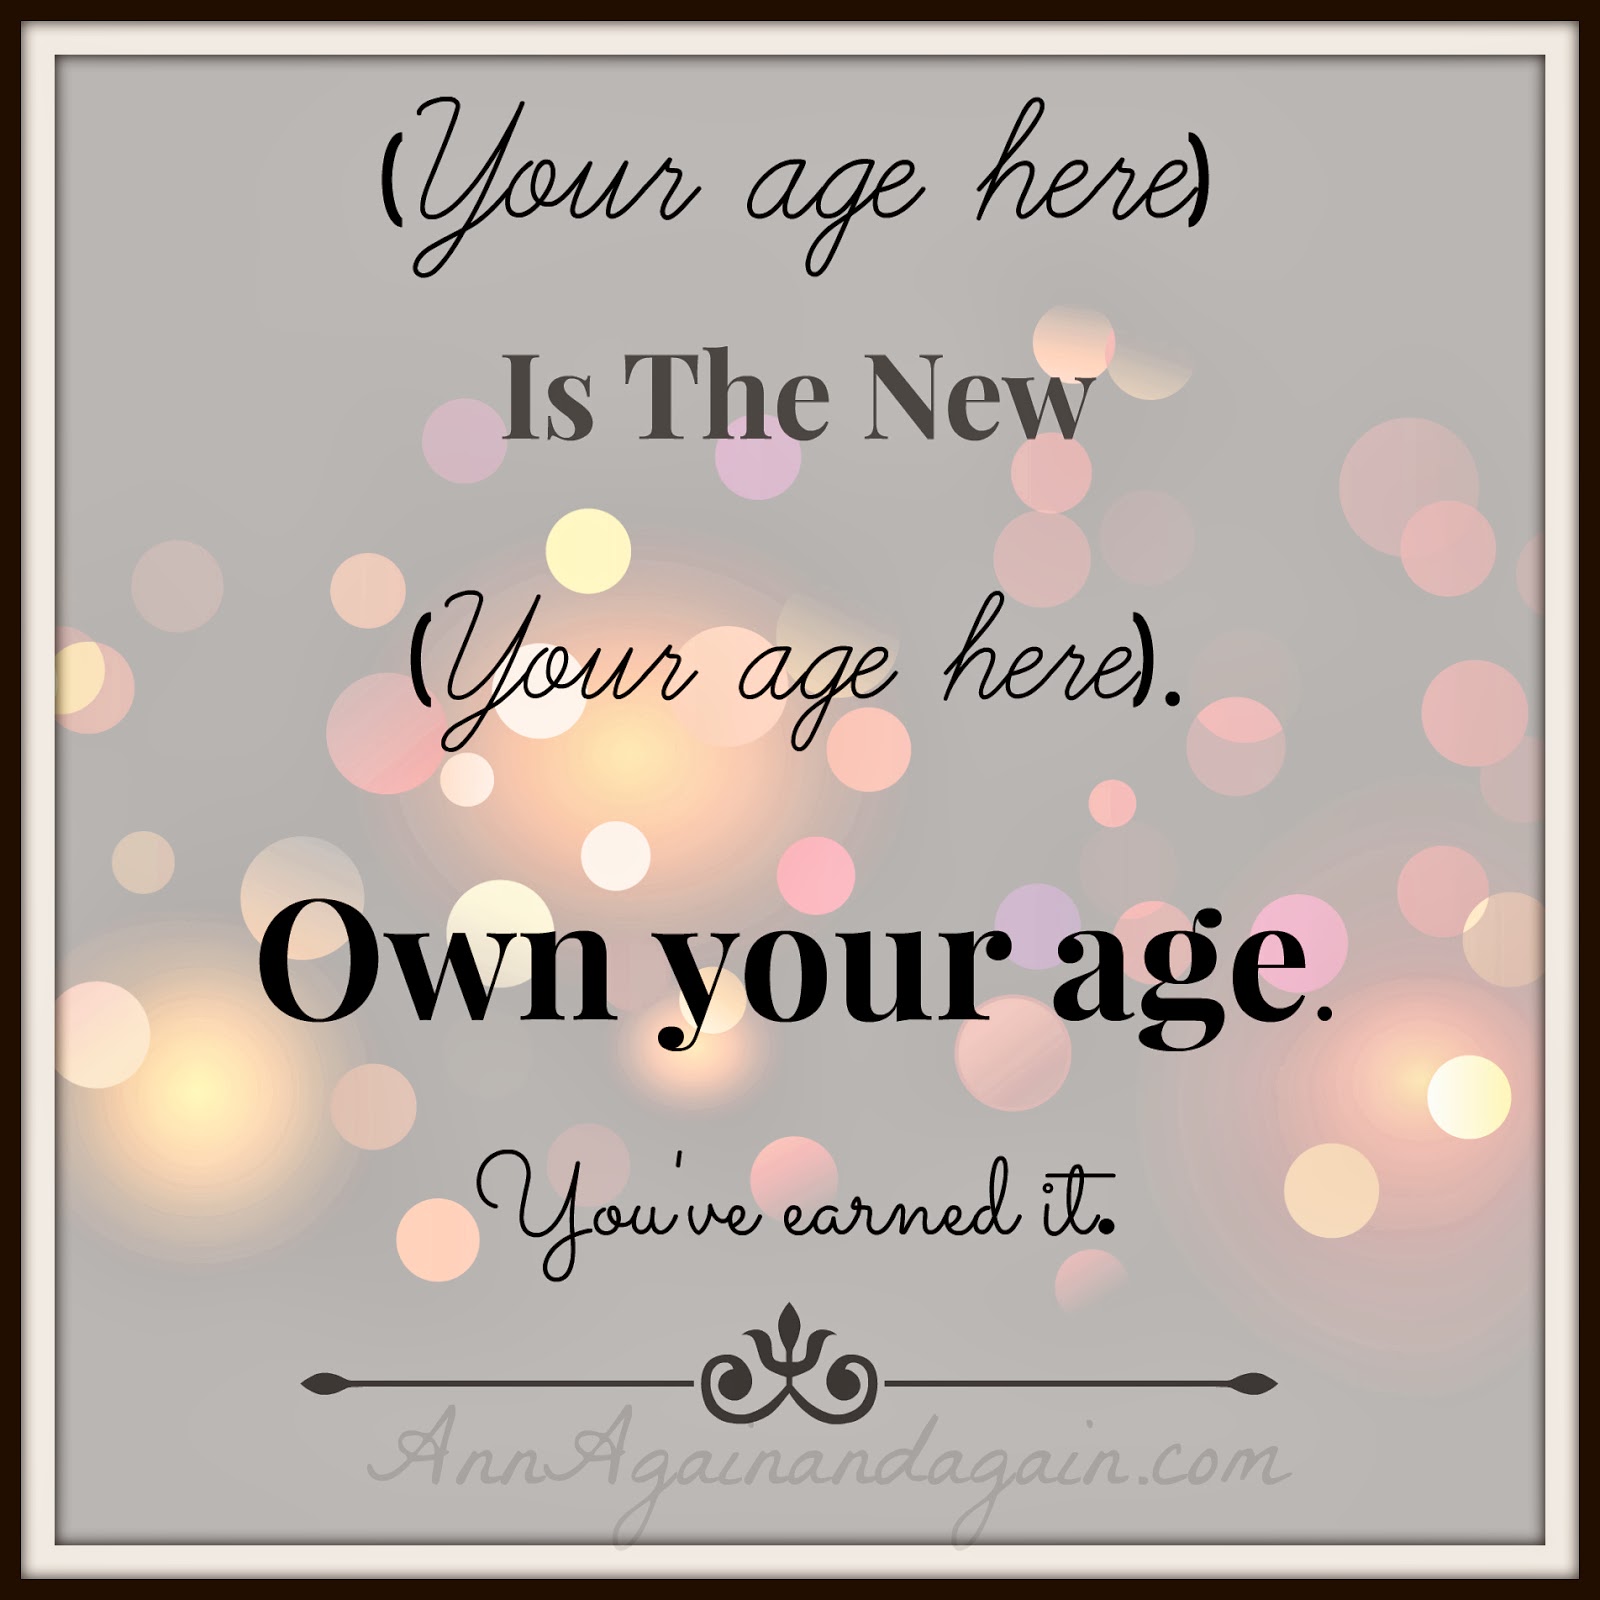 Own Your Age - you've earned it -  Ann Again and again